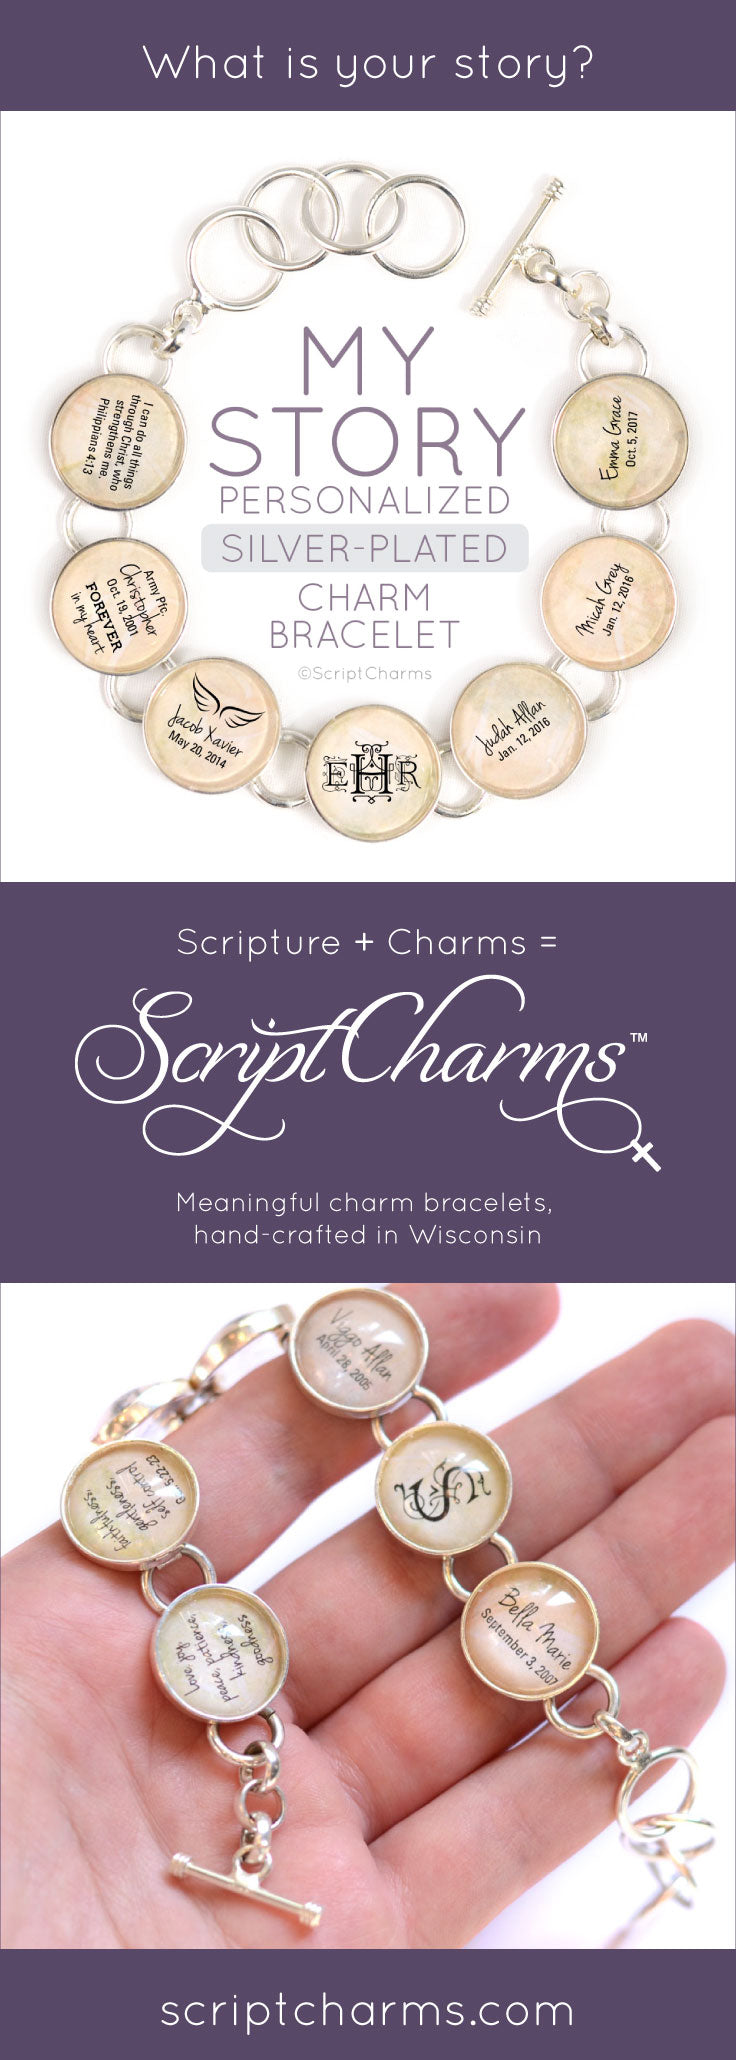 ScriptCharms Personalized My Story silver-plated charm bracelet